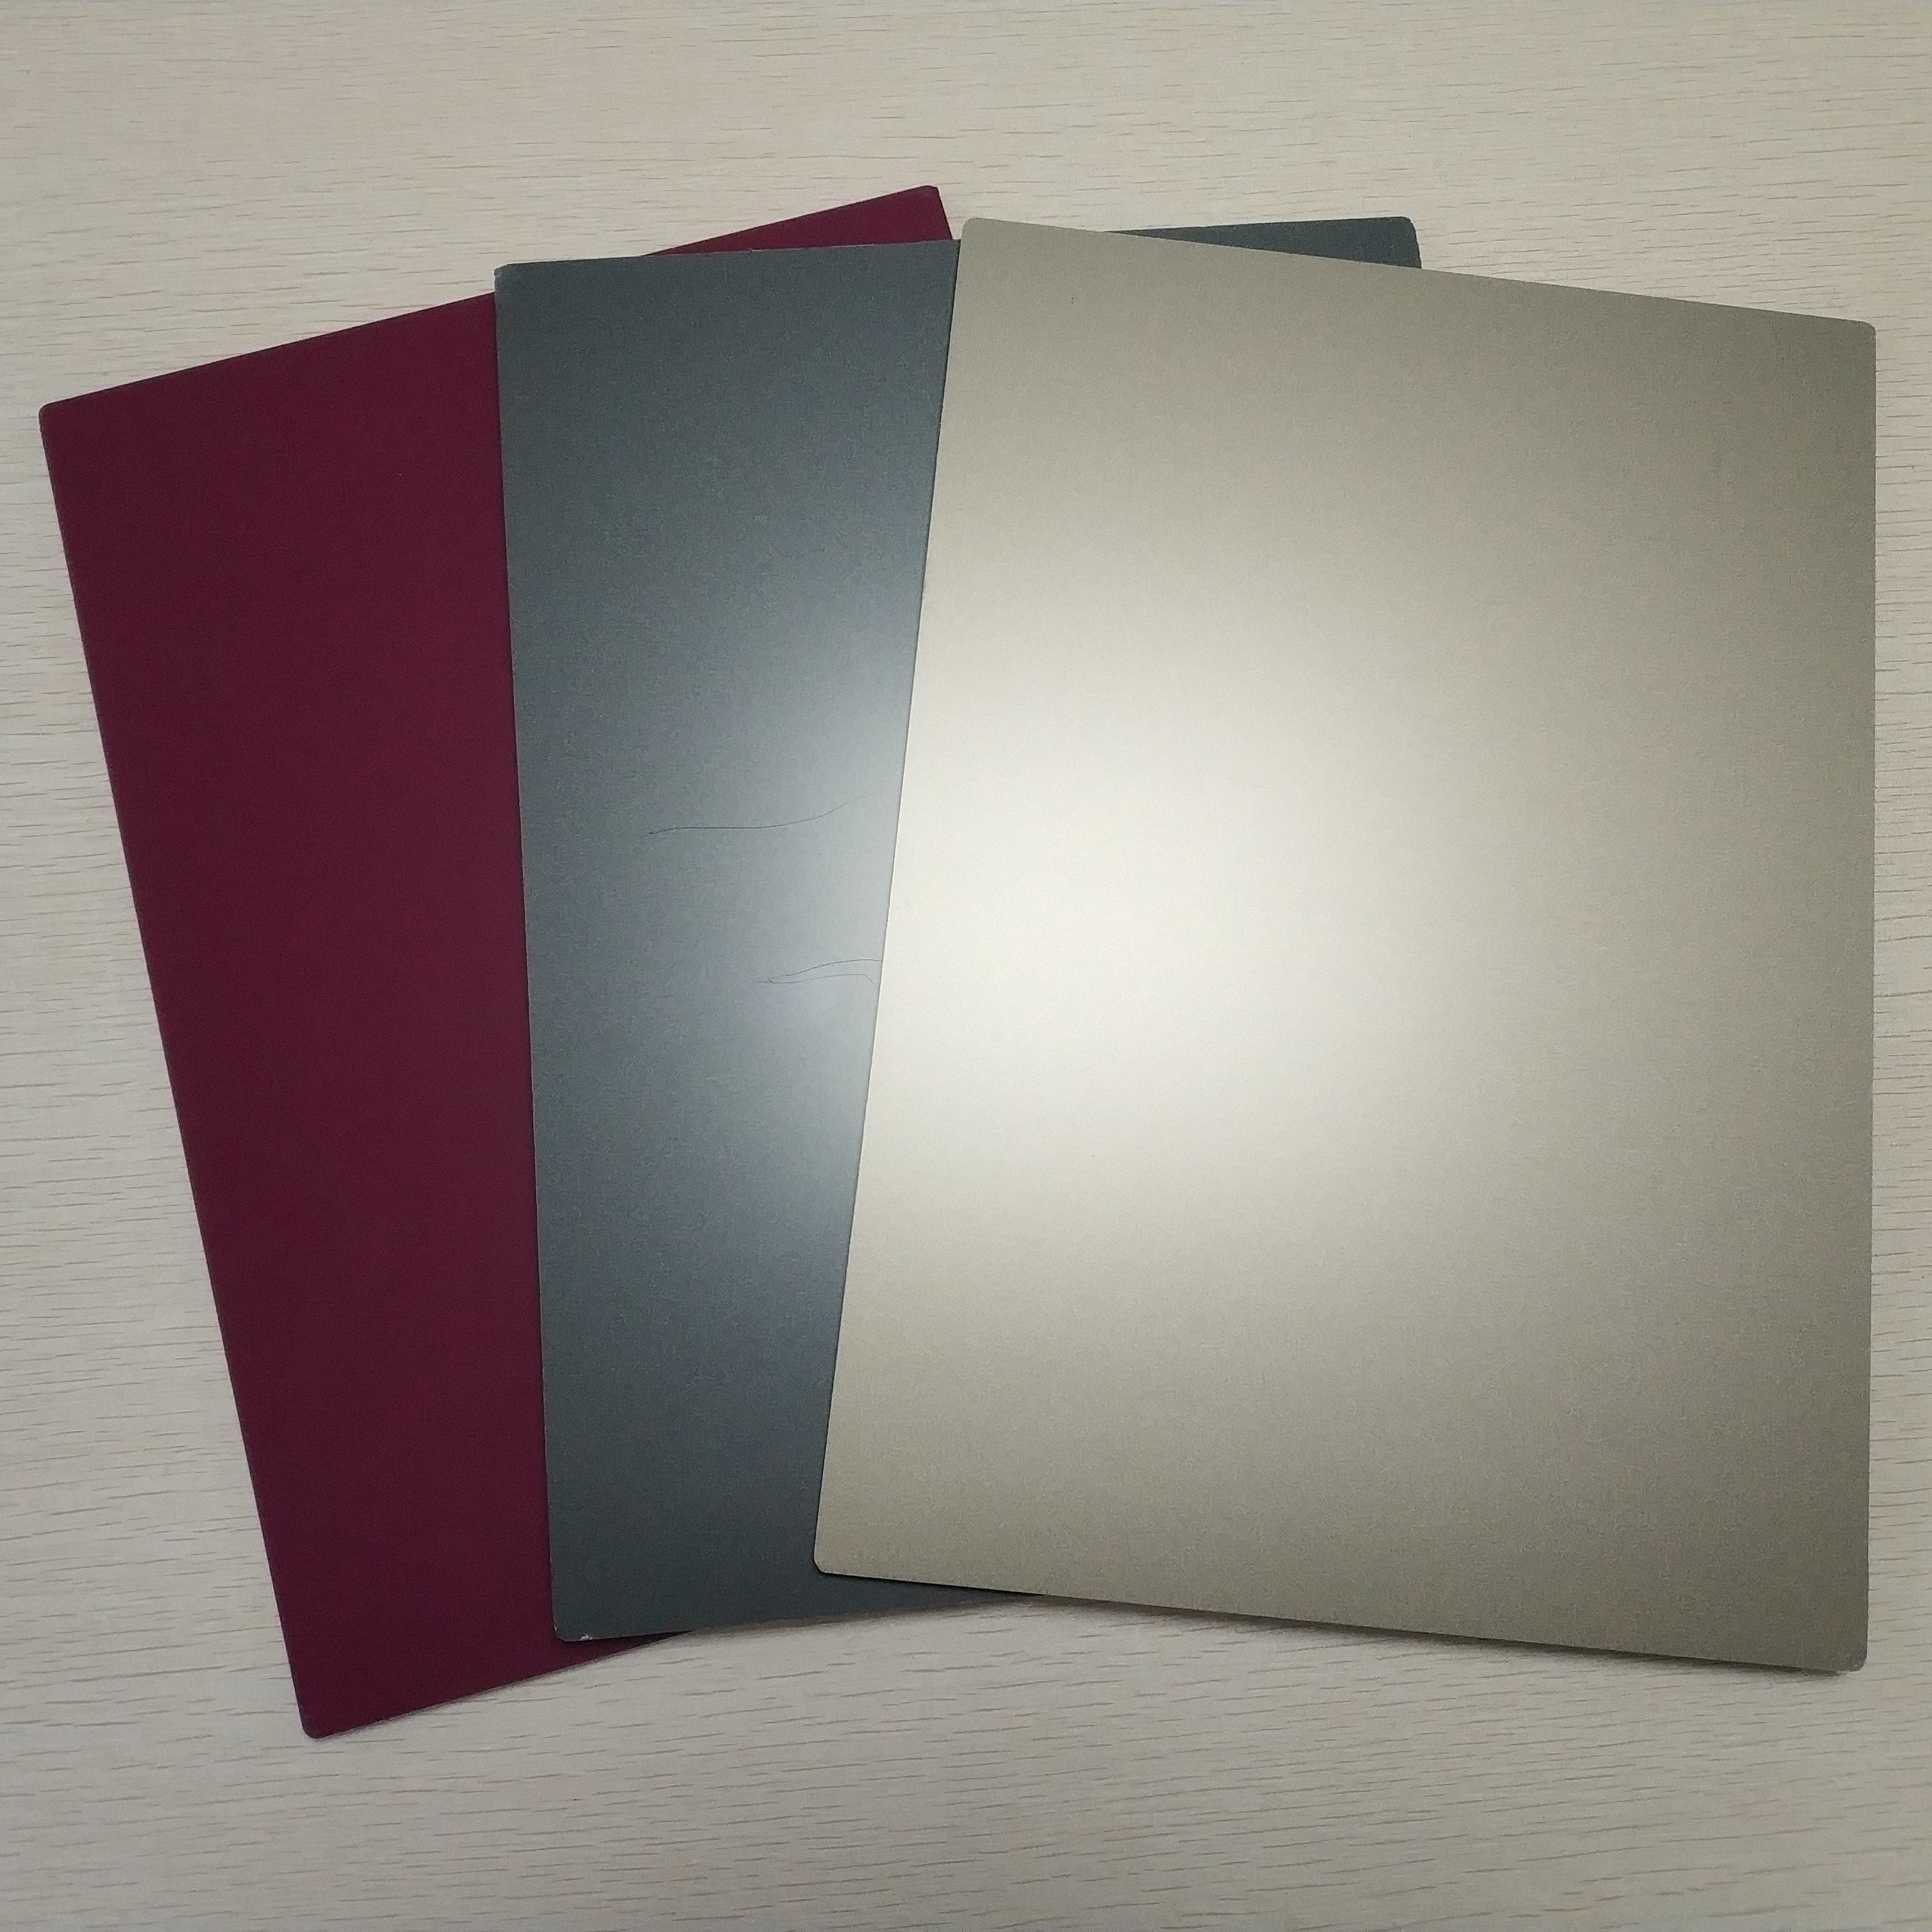 Quality Outdoor 3mm Copper Composite Panel Fireproof Long Service Life Sandwich Panel for sale